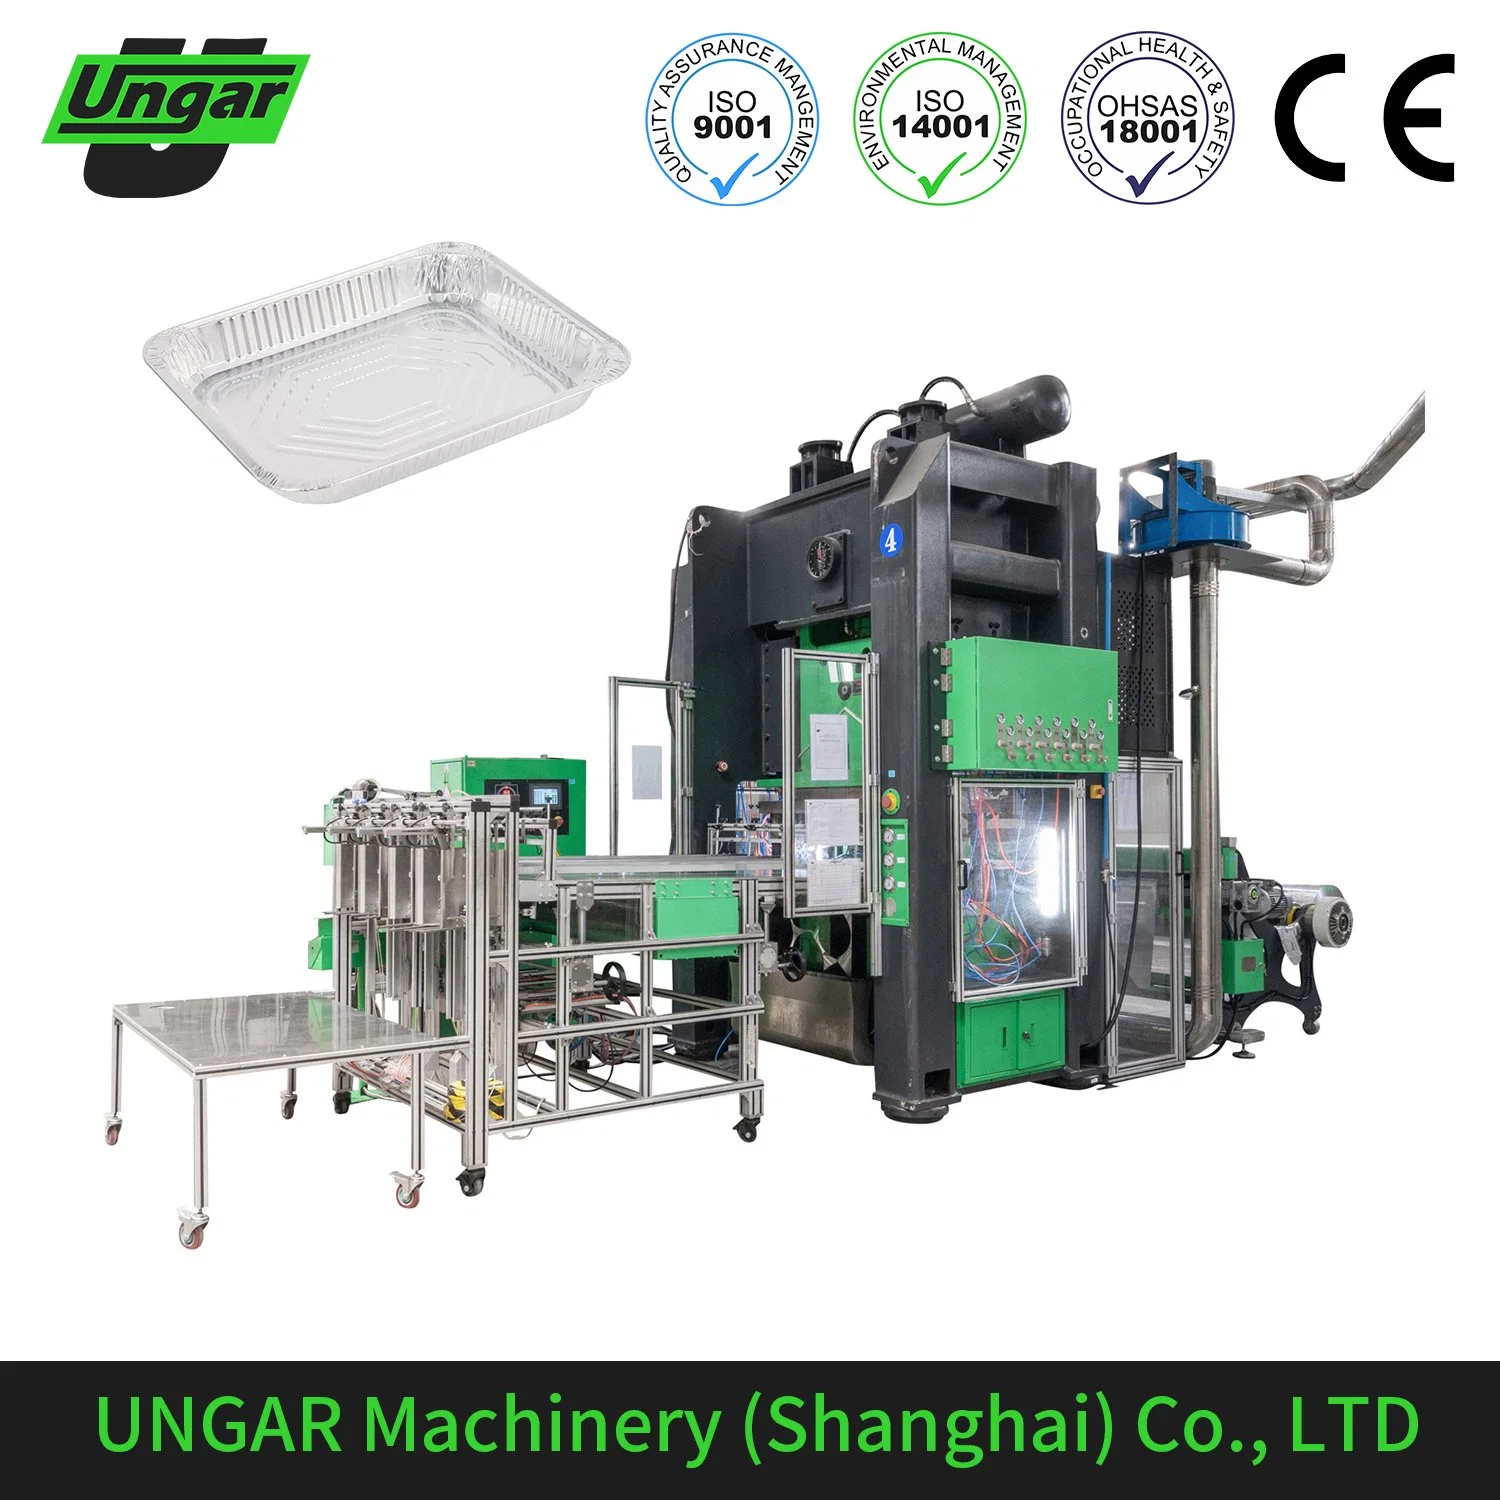 Ungar Disposable Aluminum Foil Pan/Tray/Cup/Bowl/Plate/Container for Food Packaging Making Machine